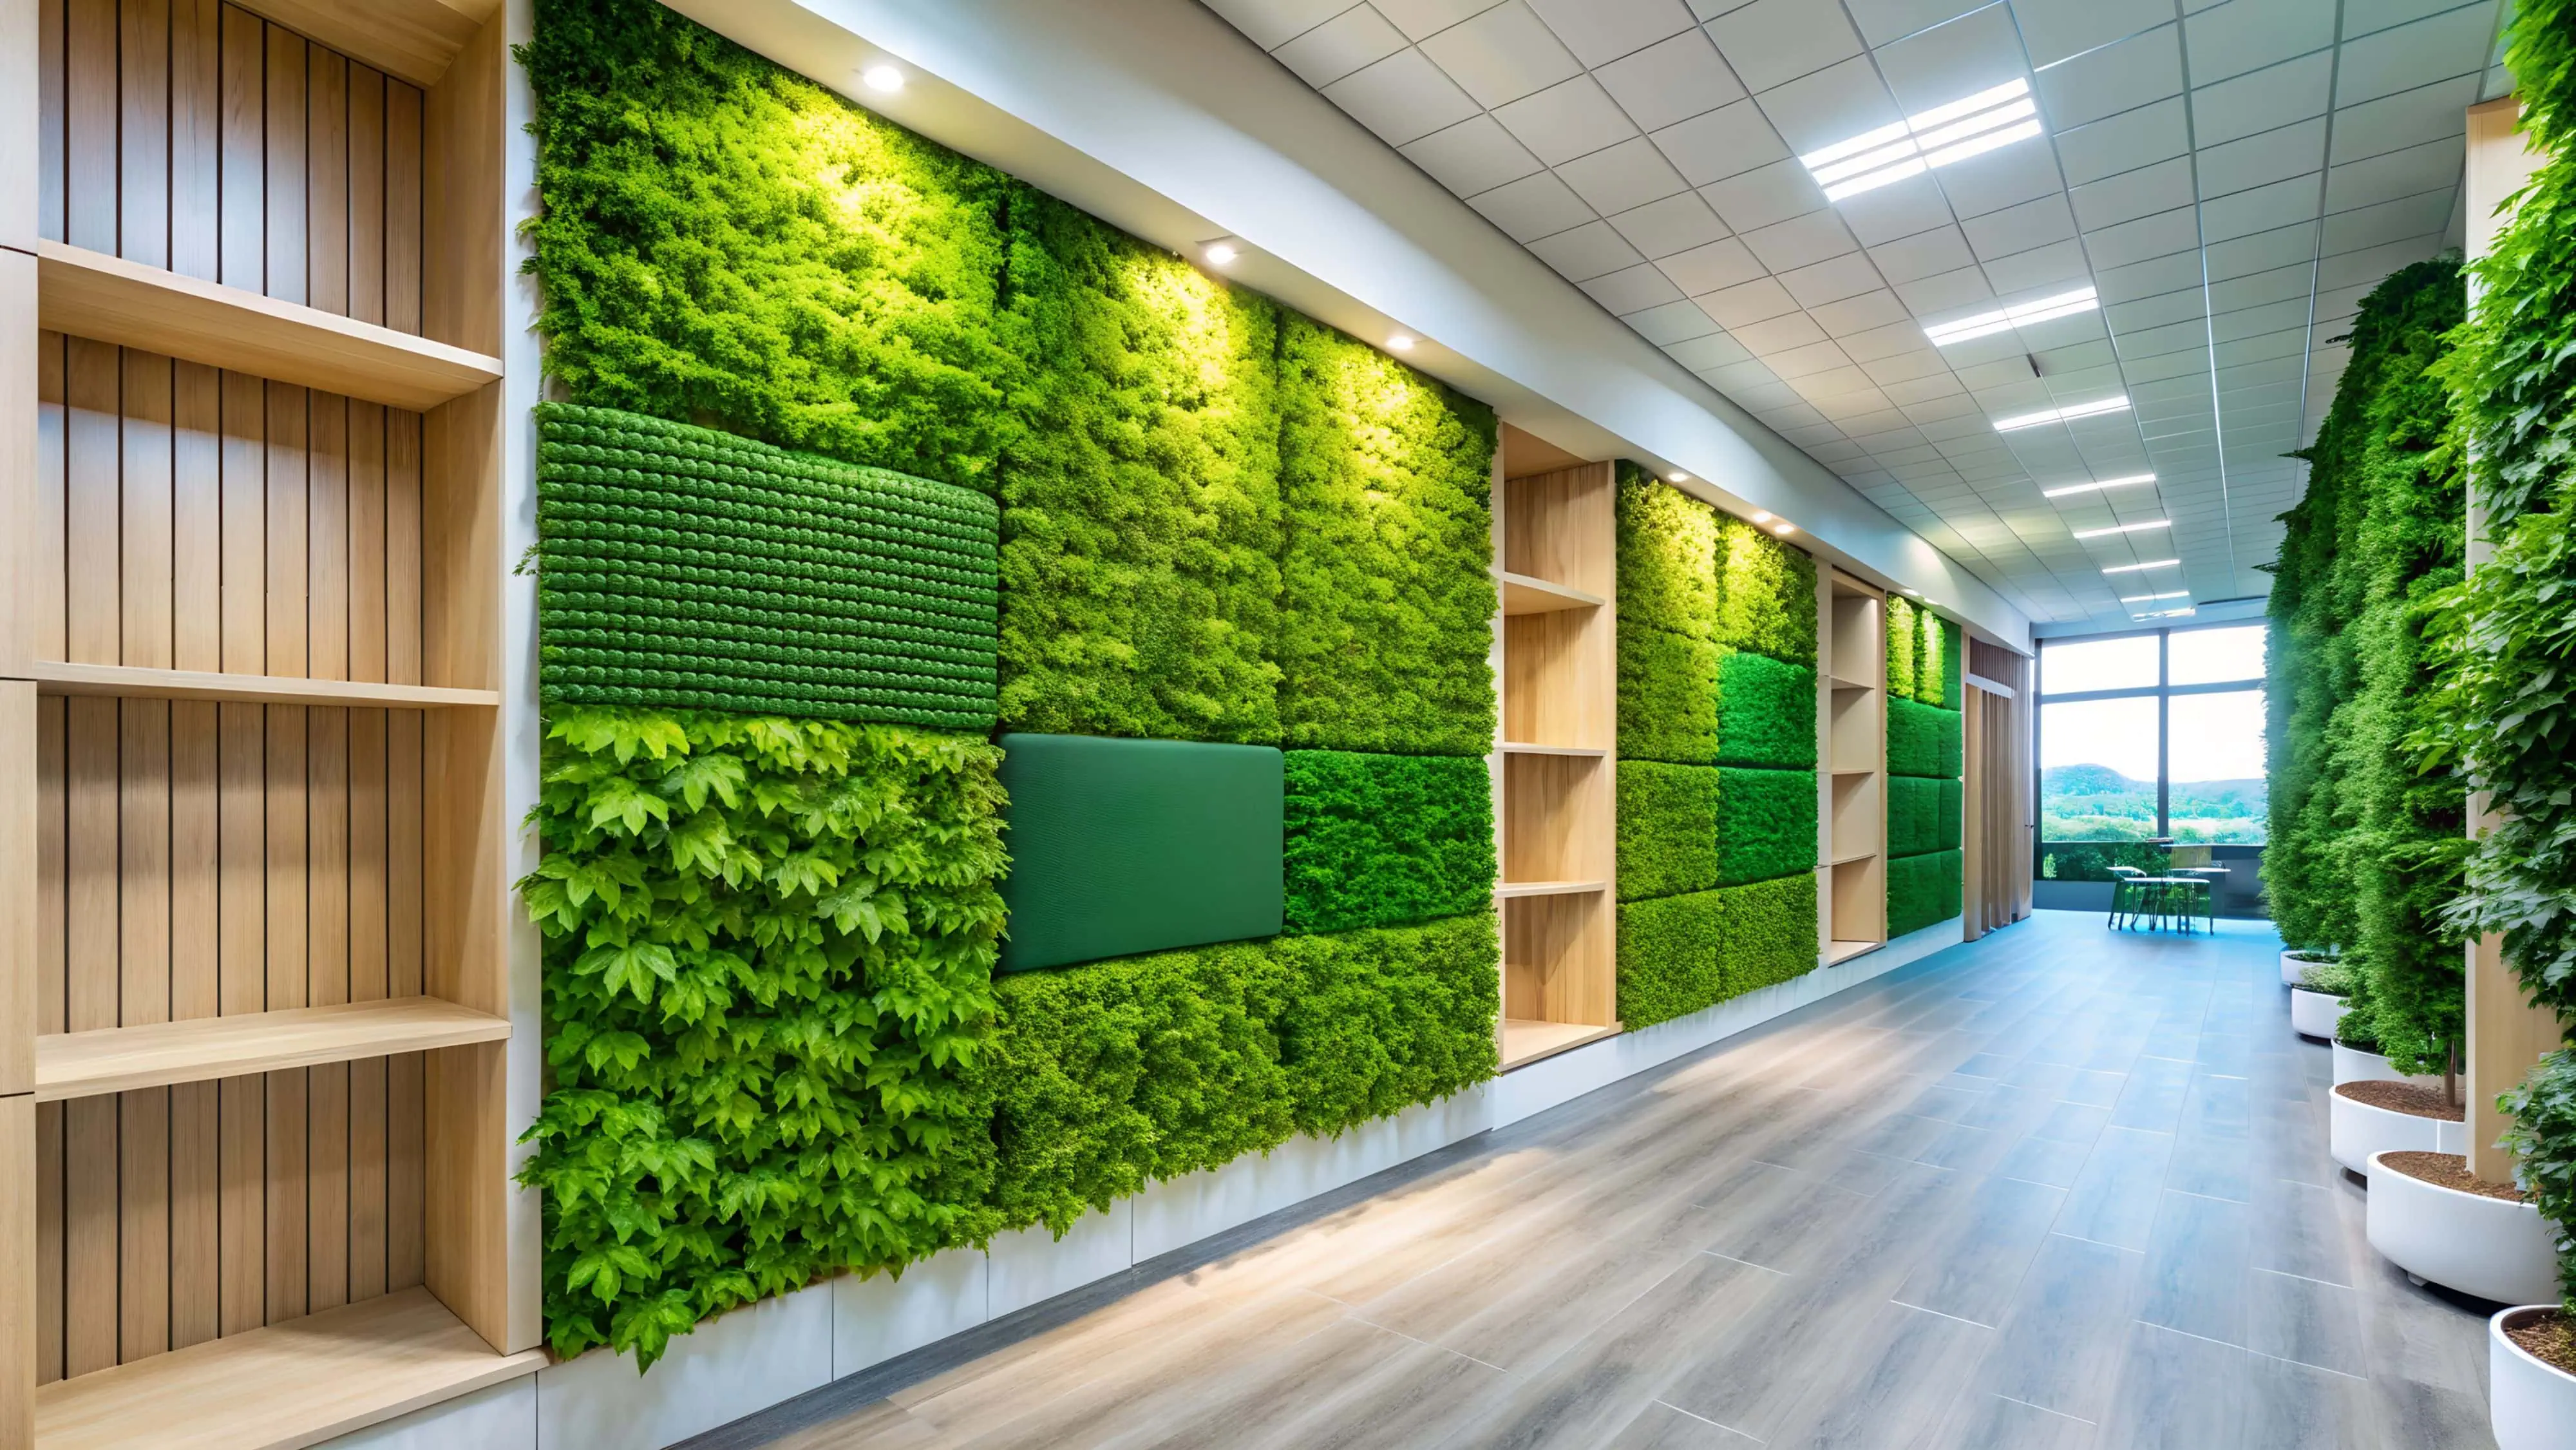 Green and quiet: integrating acoustic wall panelling with sustainable building practices